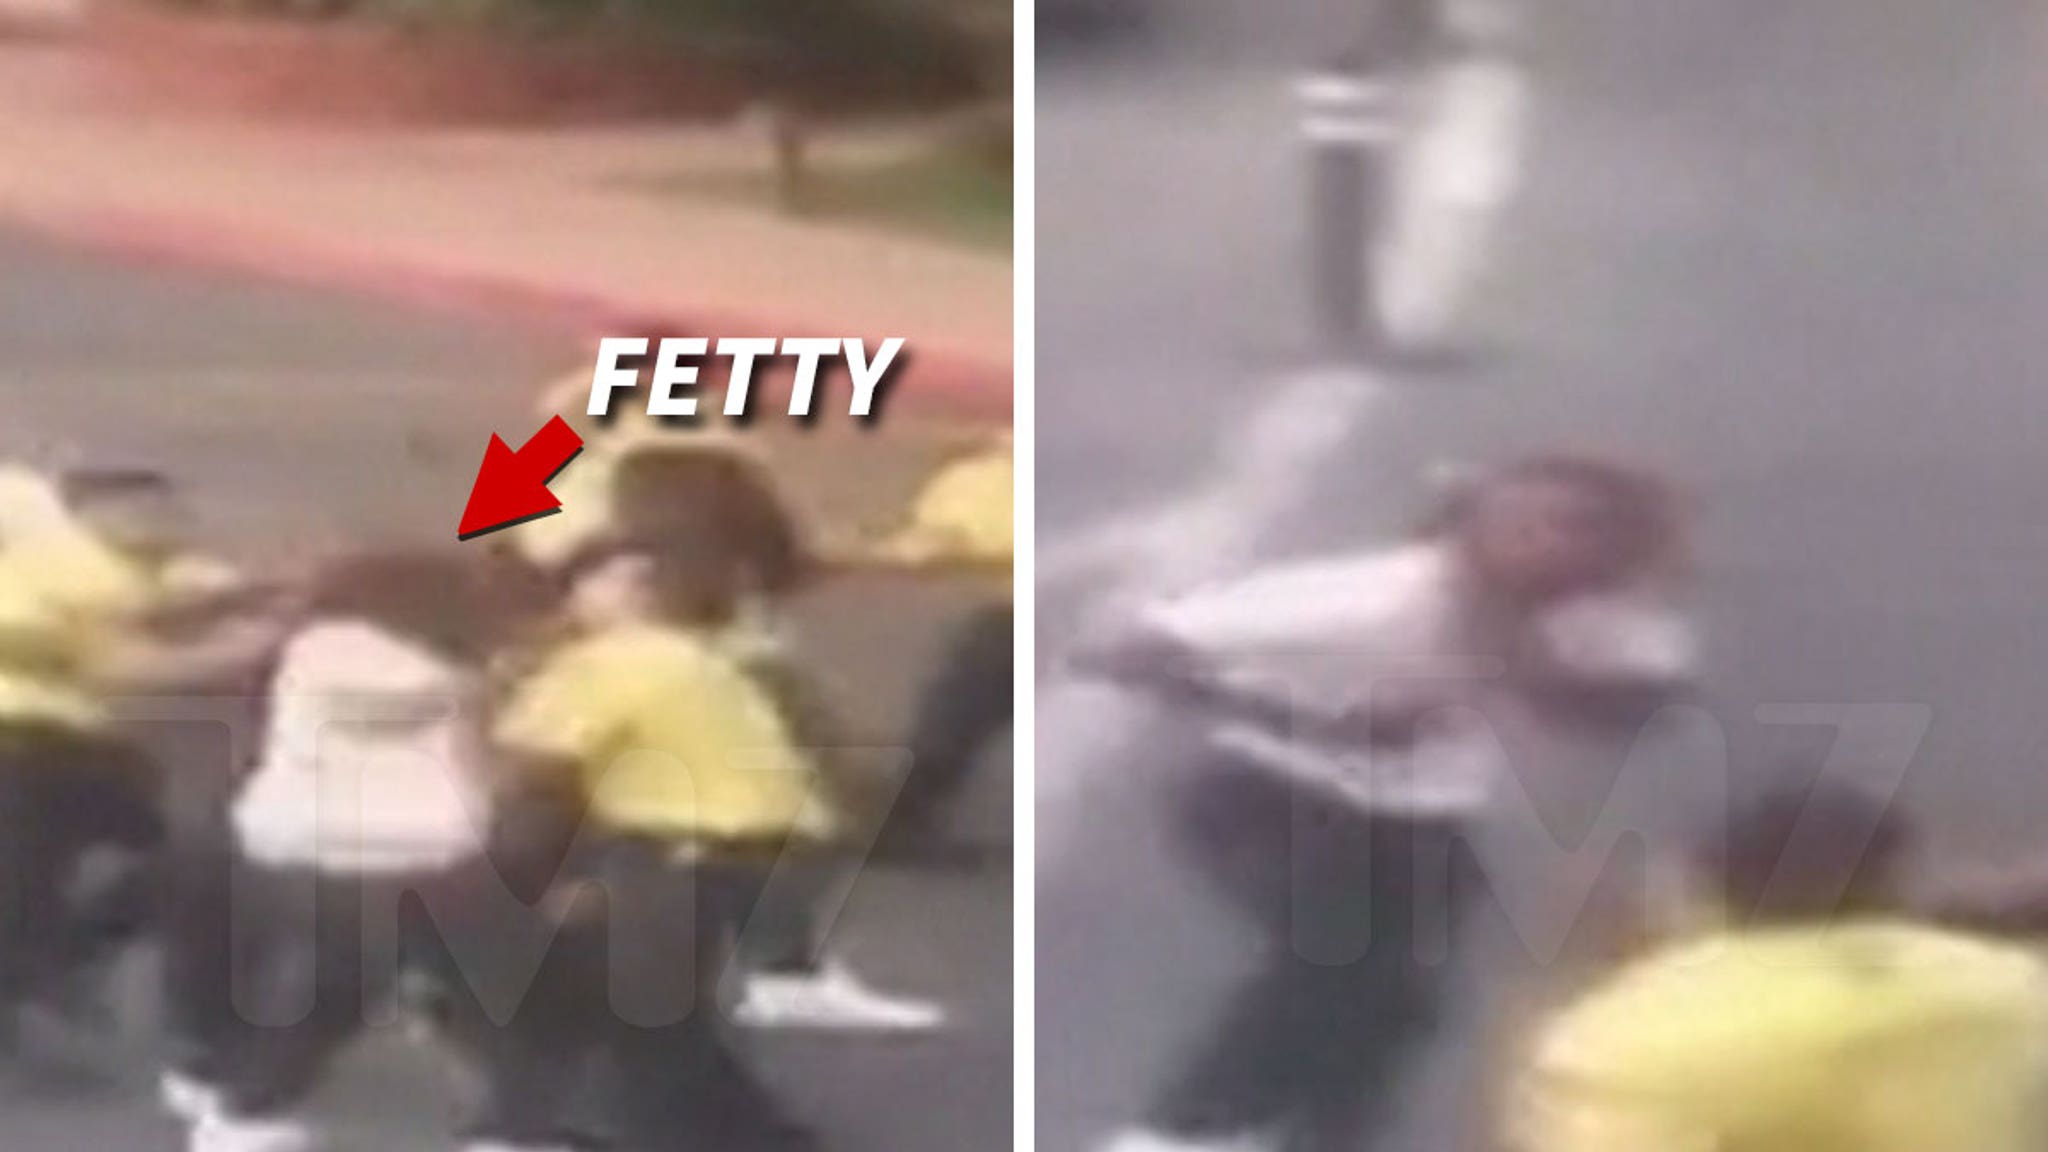 Fetty Wap Charged With Battery, Video Shows Him Punching Security